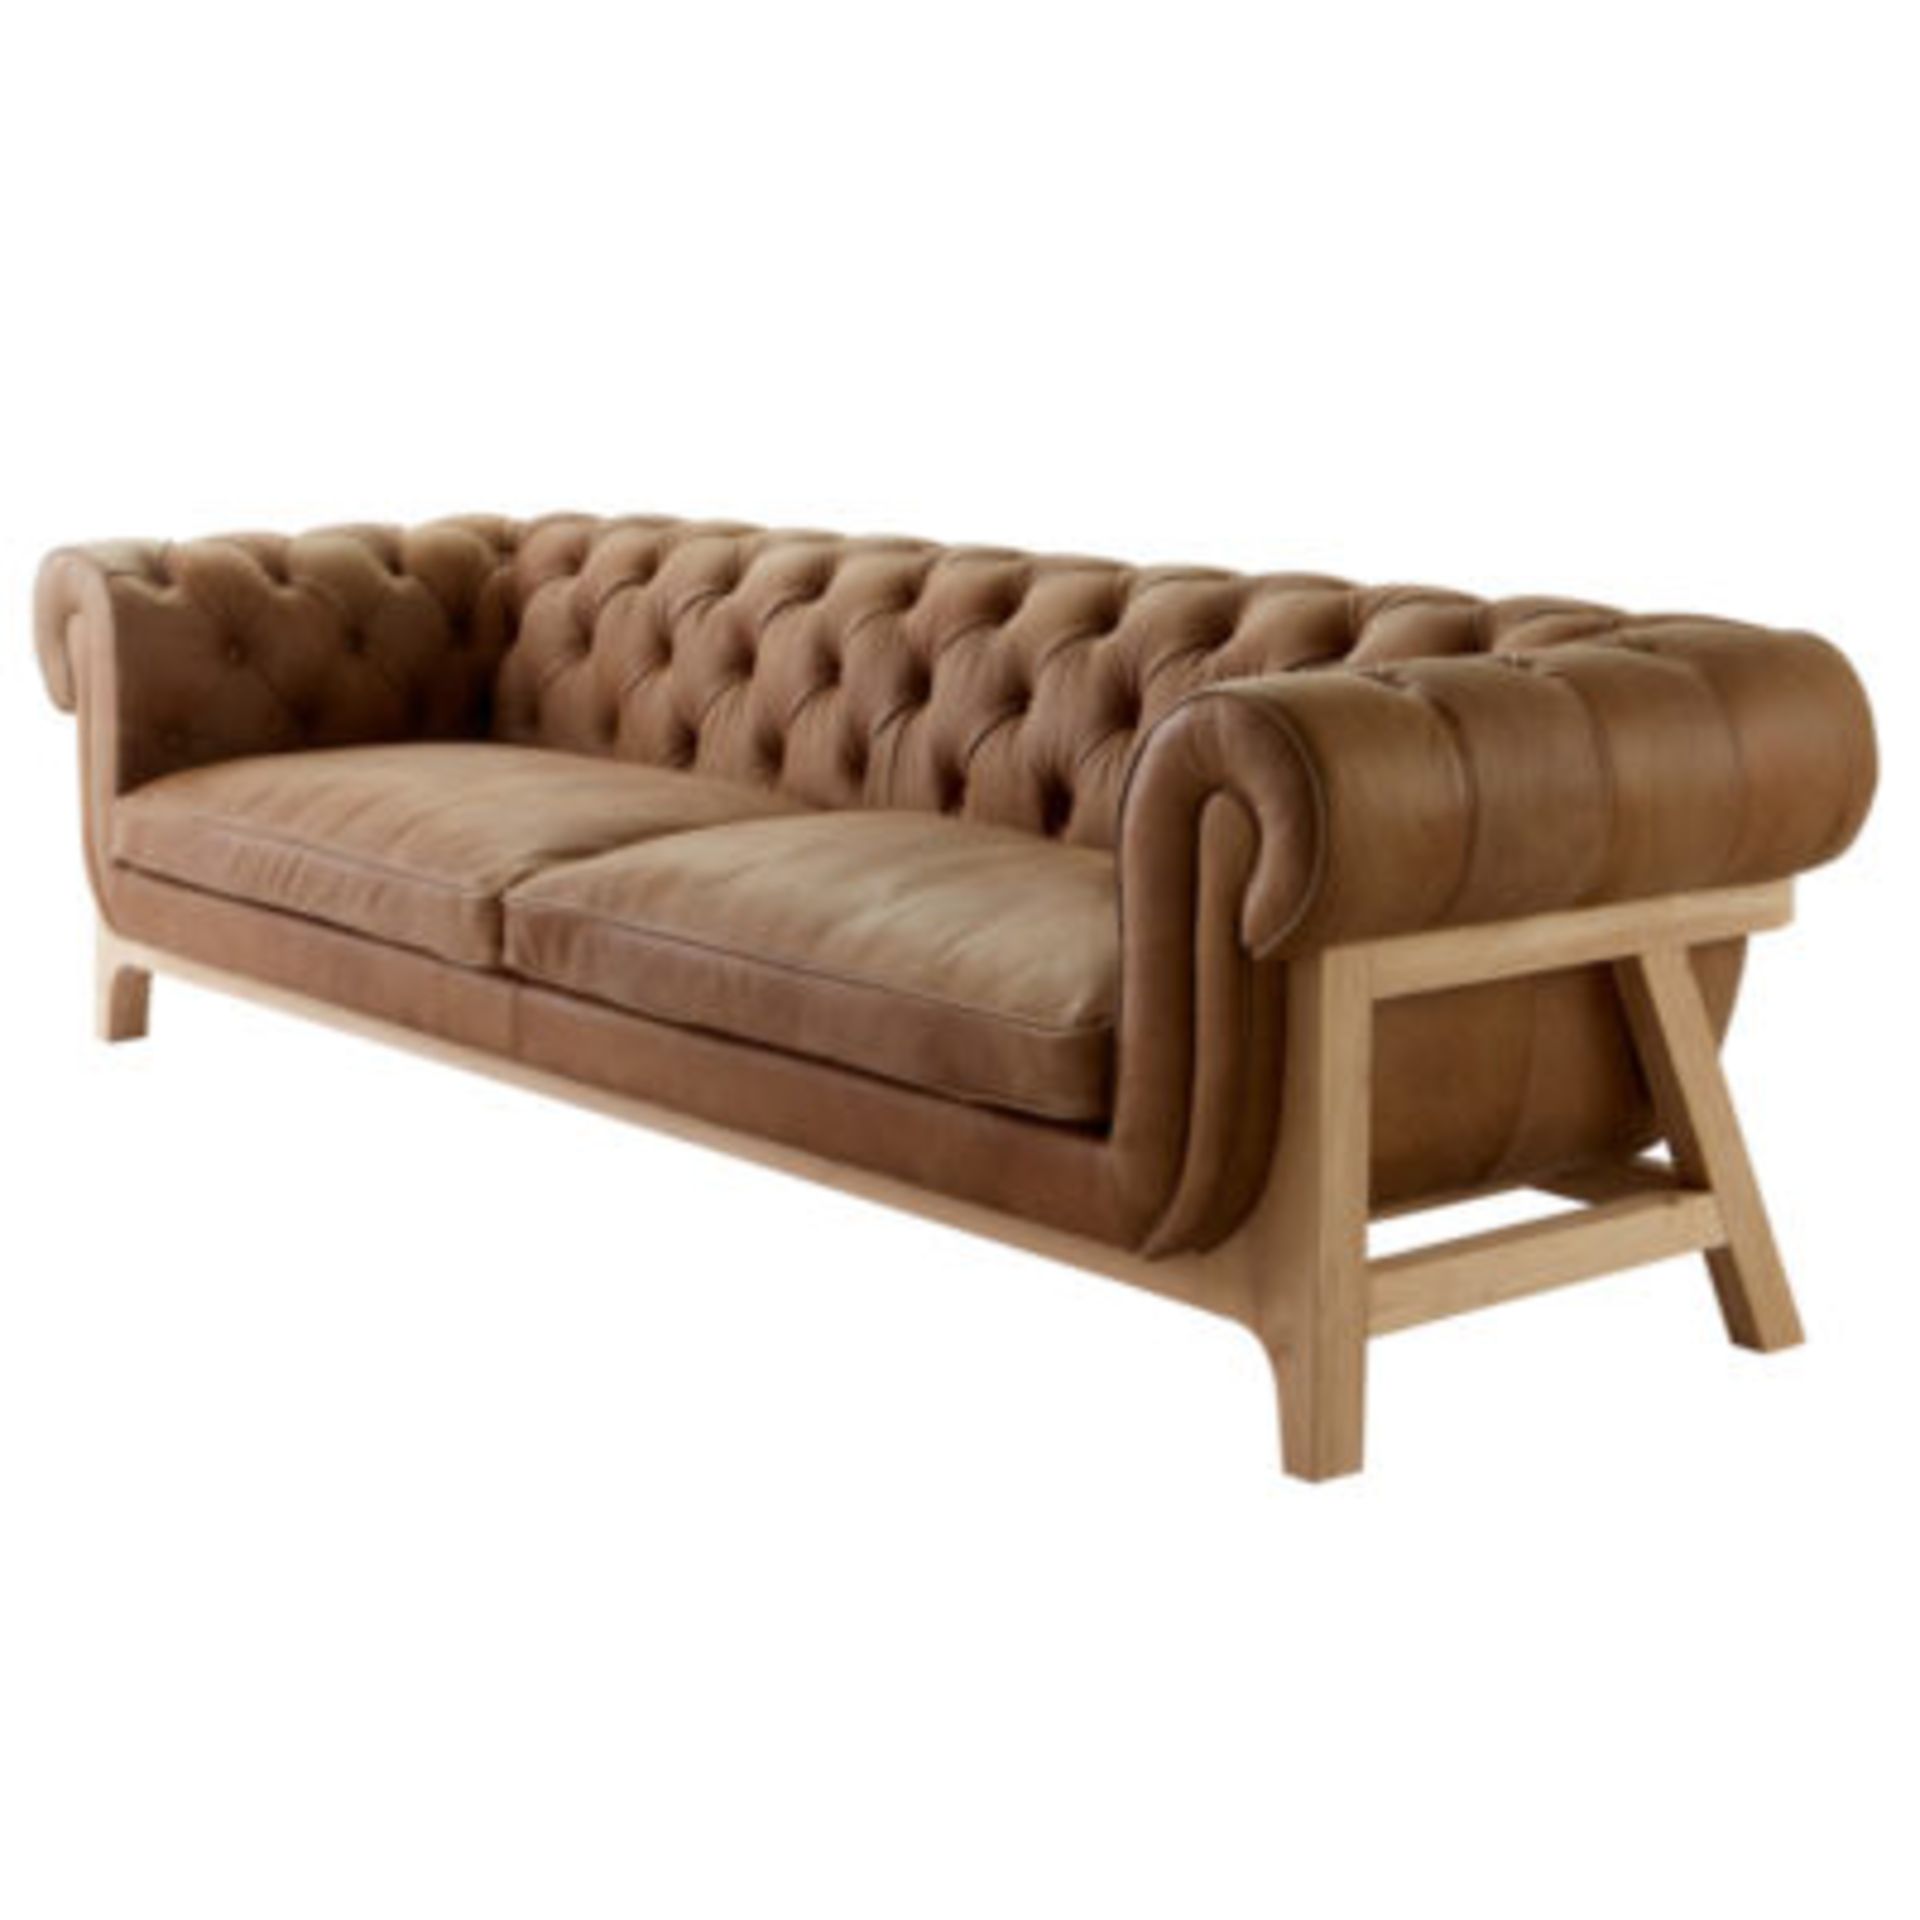 Bleu Nature Cocoon Chesterfield 4 Seater Sofa – F277 Rebel Leather And Raw Oak Bleu Nature Came Of - Image 2 of 2